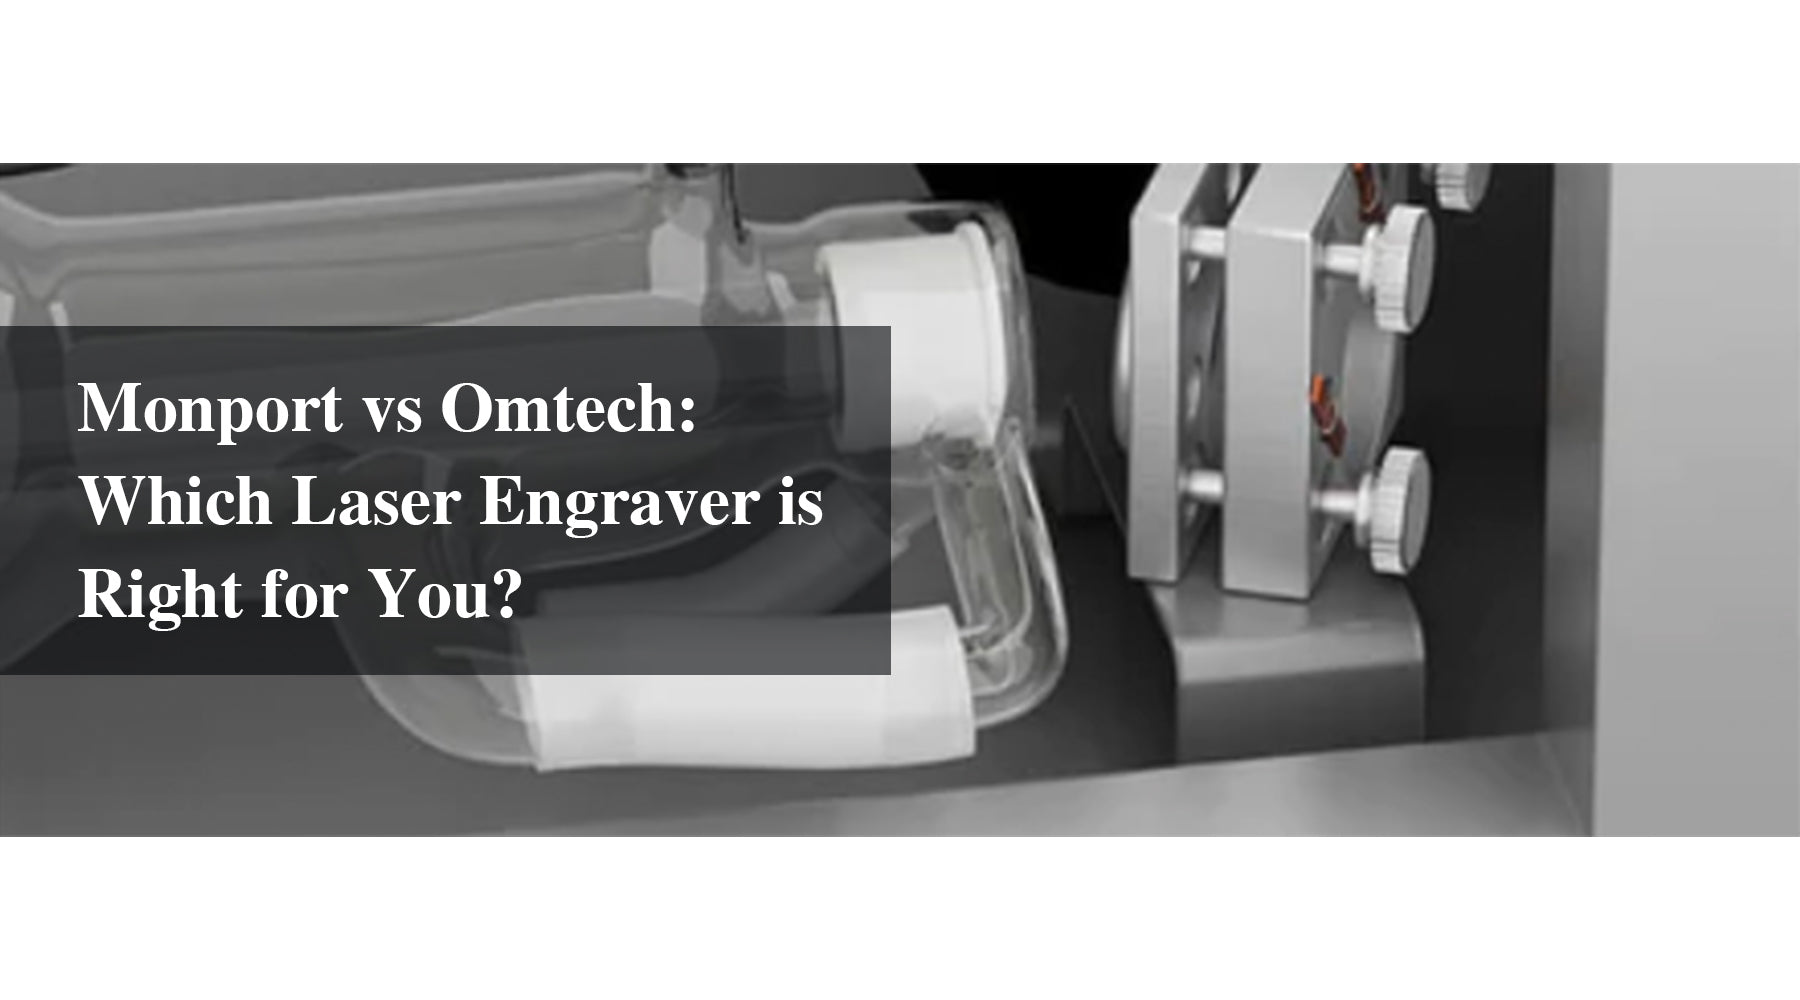 Monport vs Omtech : Which Laser Engraver is Right for You?